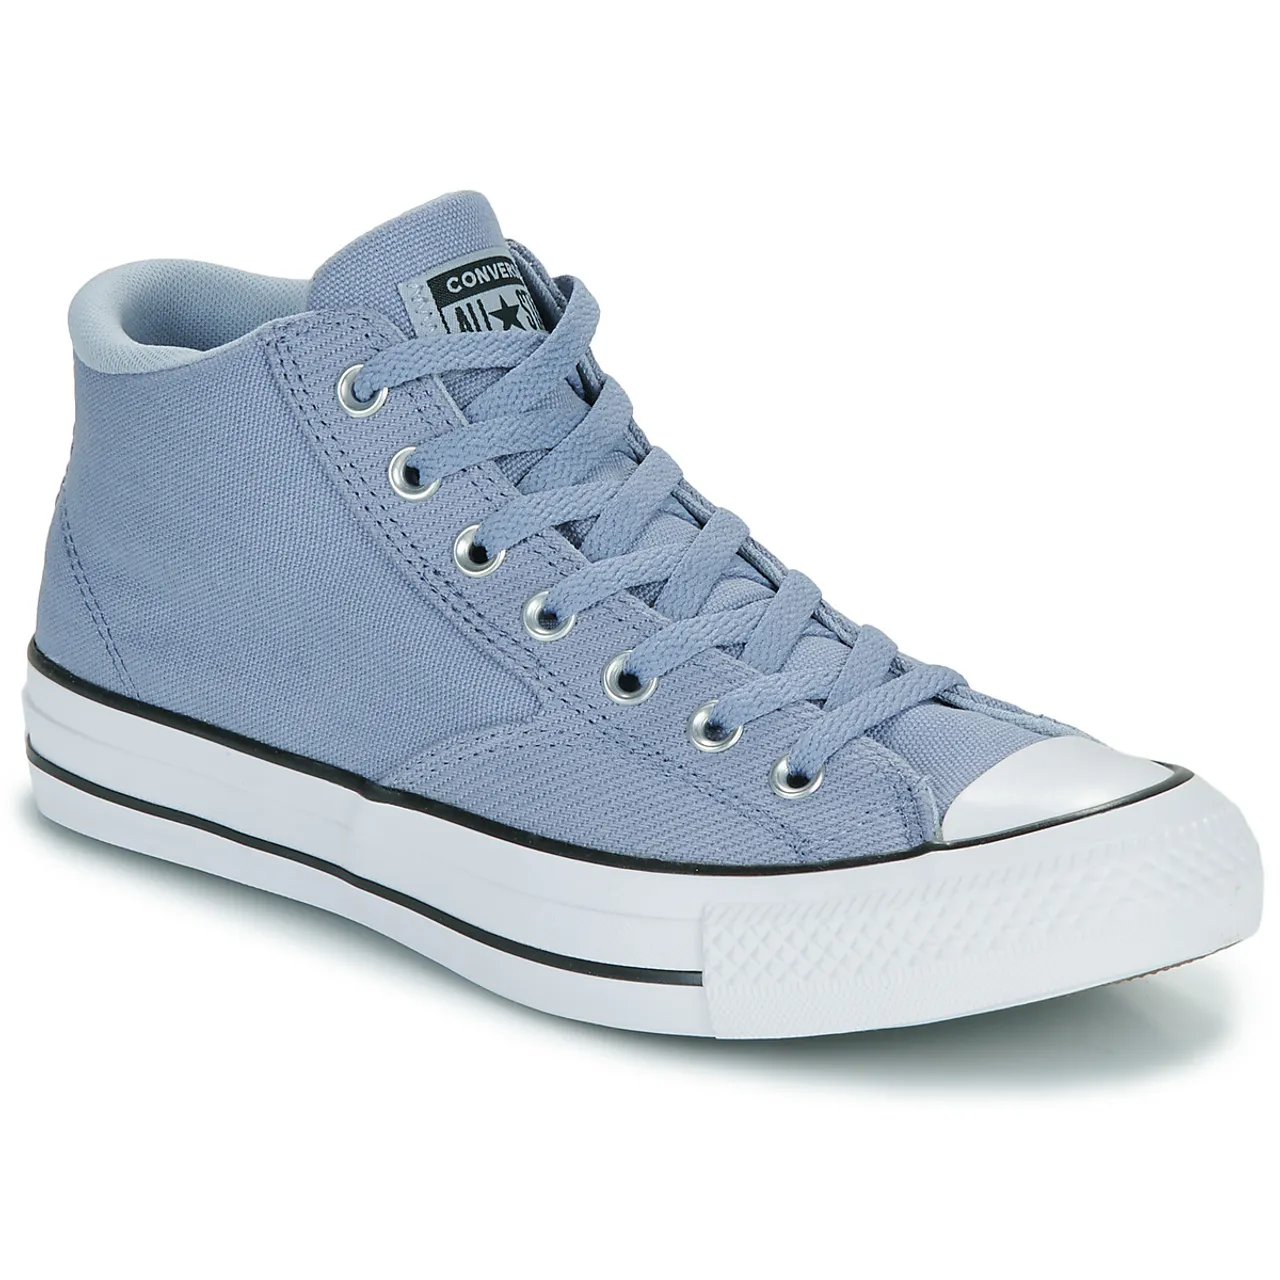 Converse  CHUCK TAYLOR ALL STAR MALDEN STREET  men's Shoes (High-top Trainers) in Blue